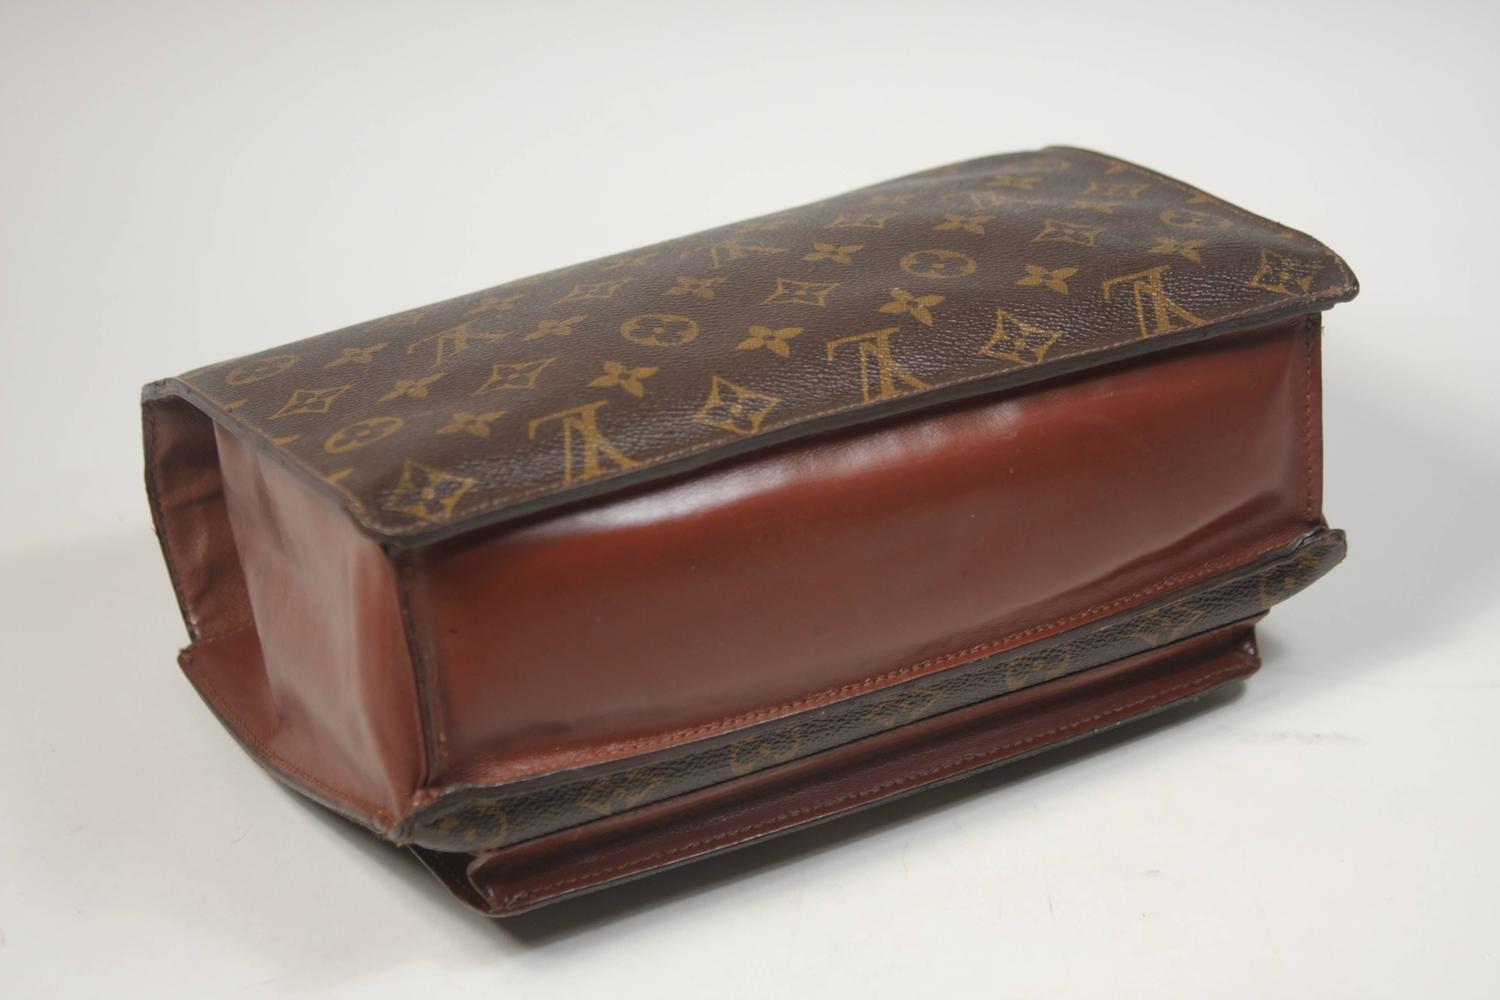 LOUIS VUITTON MONCEAU Top Handle Purse with Optional Cross Body Strap at 1stdibs